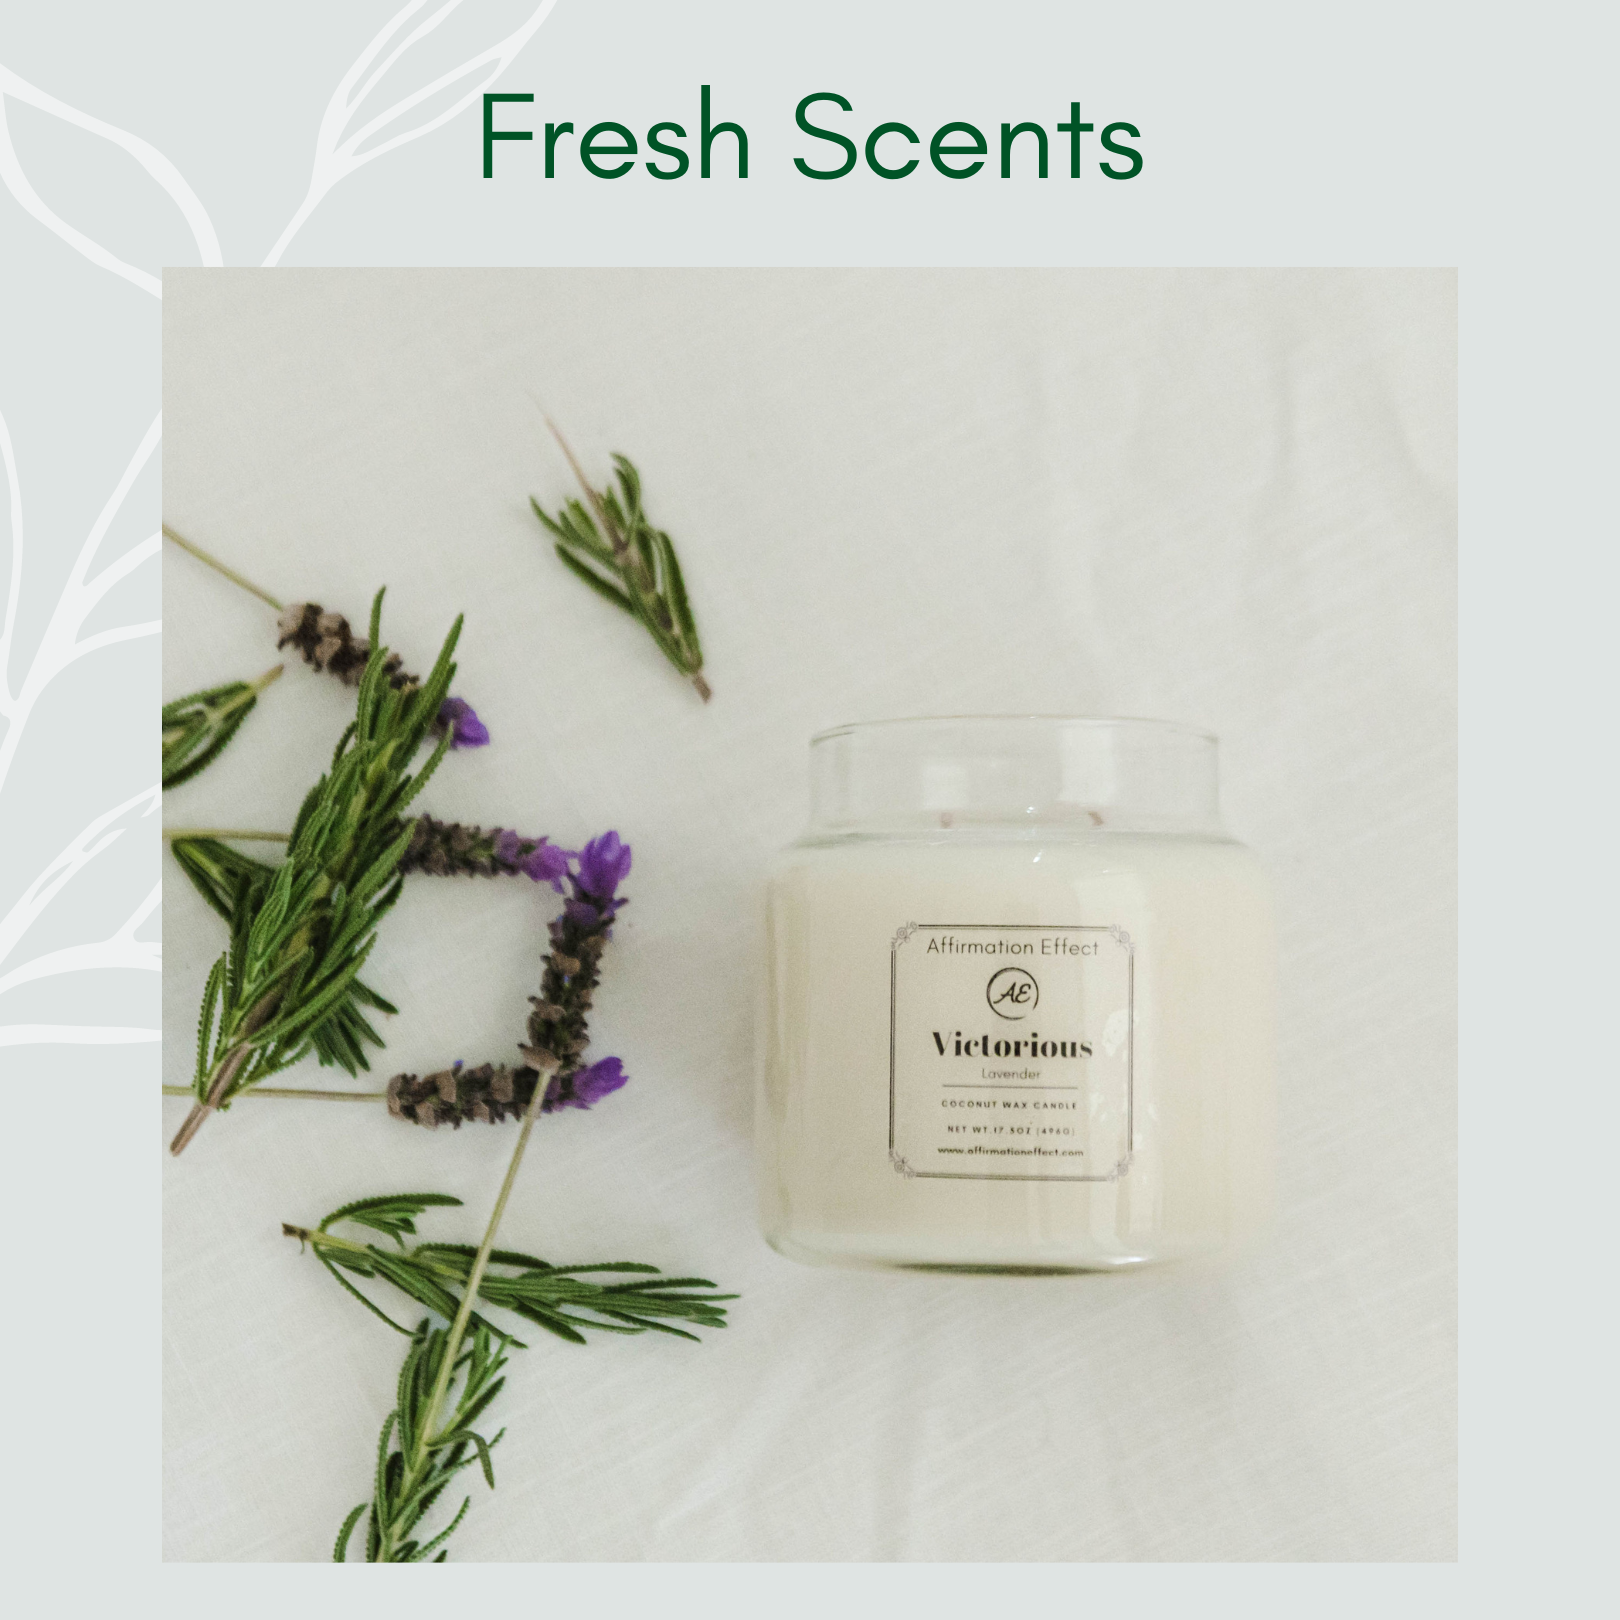 An uplifting image of coconut wax candles, radiating positive vibes with a serene ambiance. The candles are beautifully crafted, emitting a refreshing and invigorating fragrance. Each candle features a unique positive affirmation, promoting a sense of well-being and mindfulness